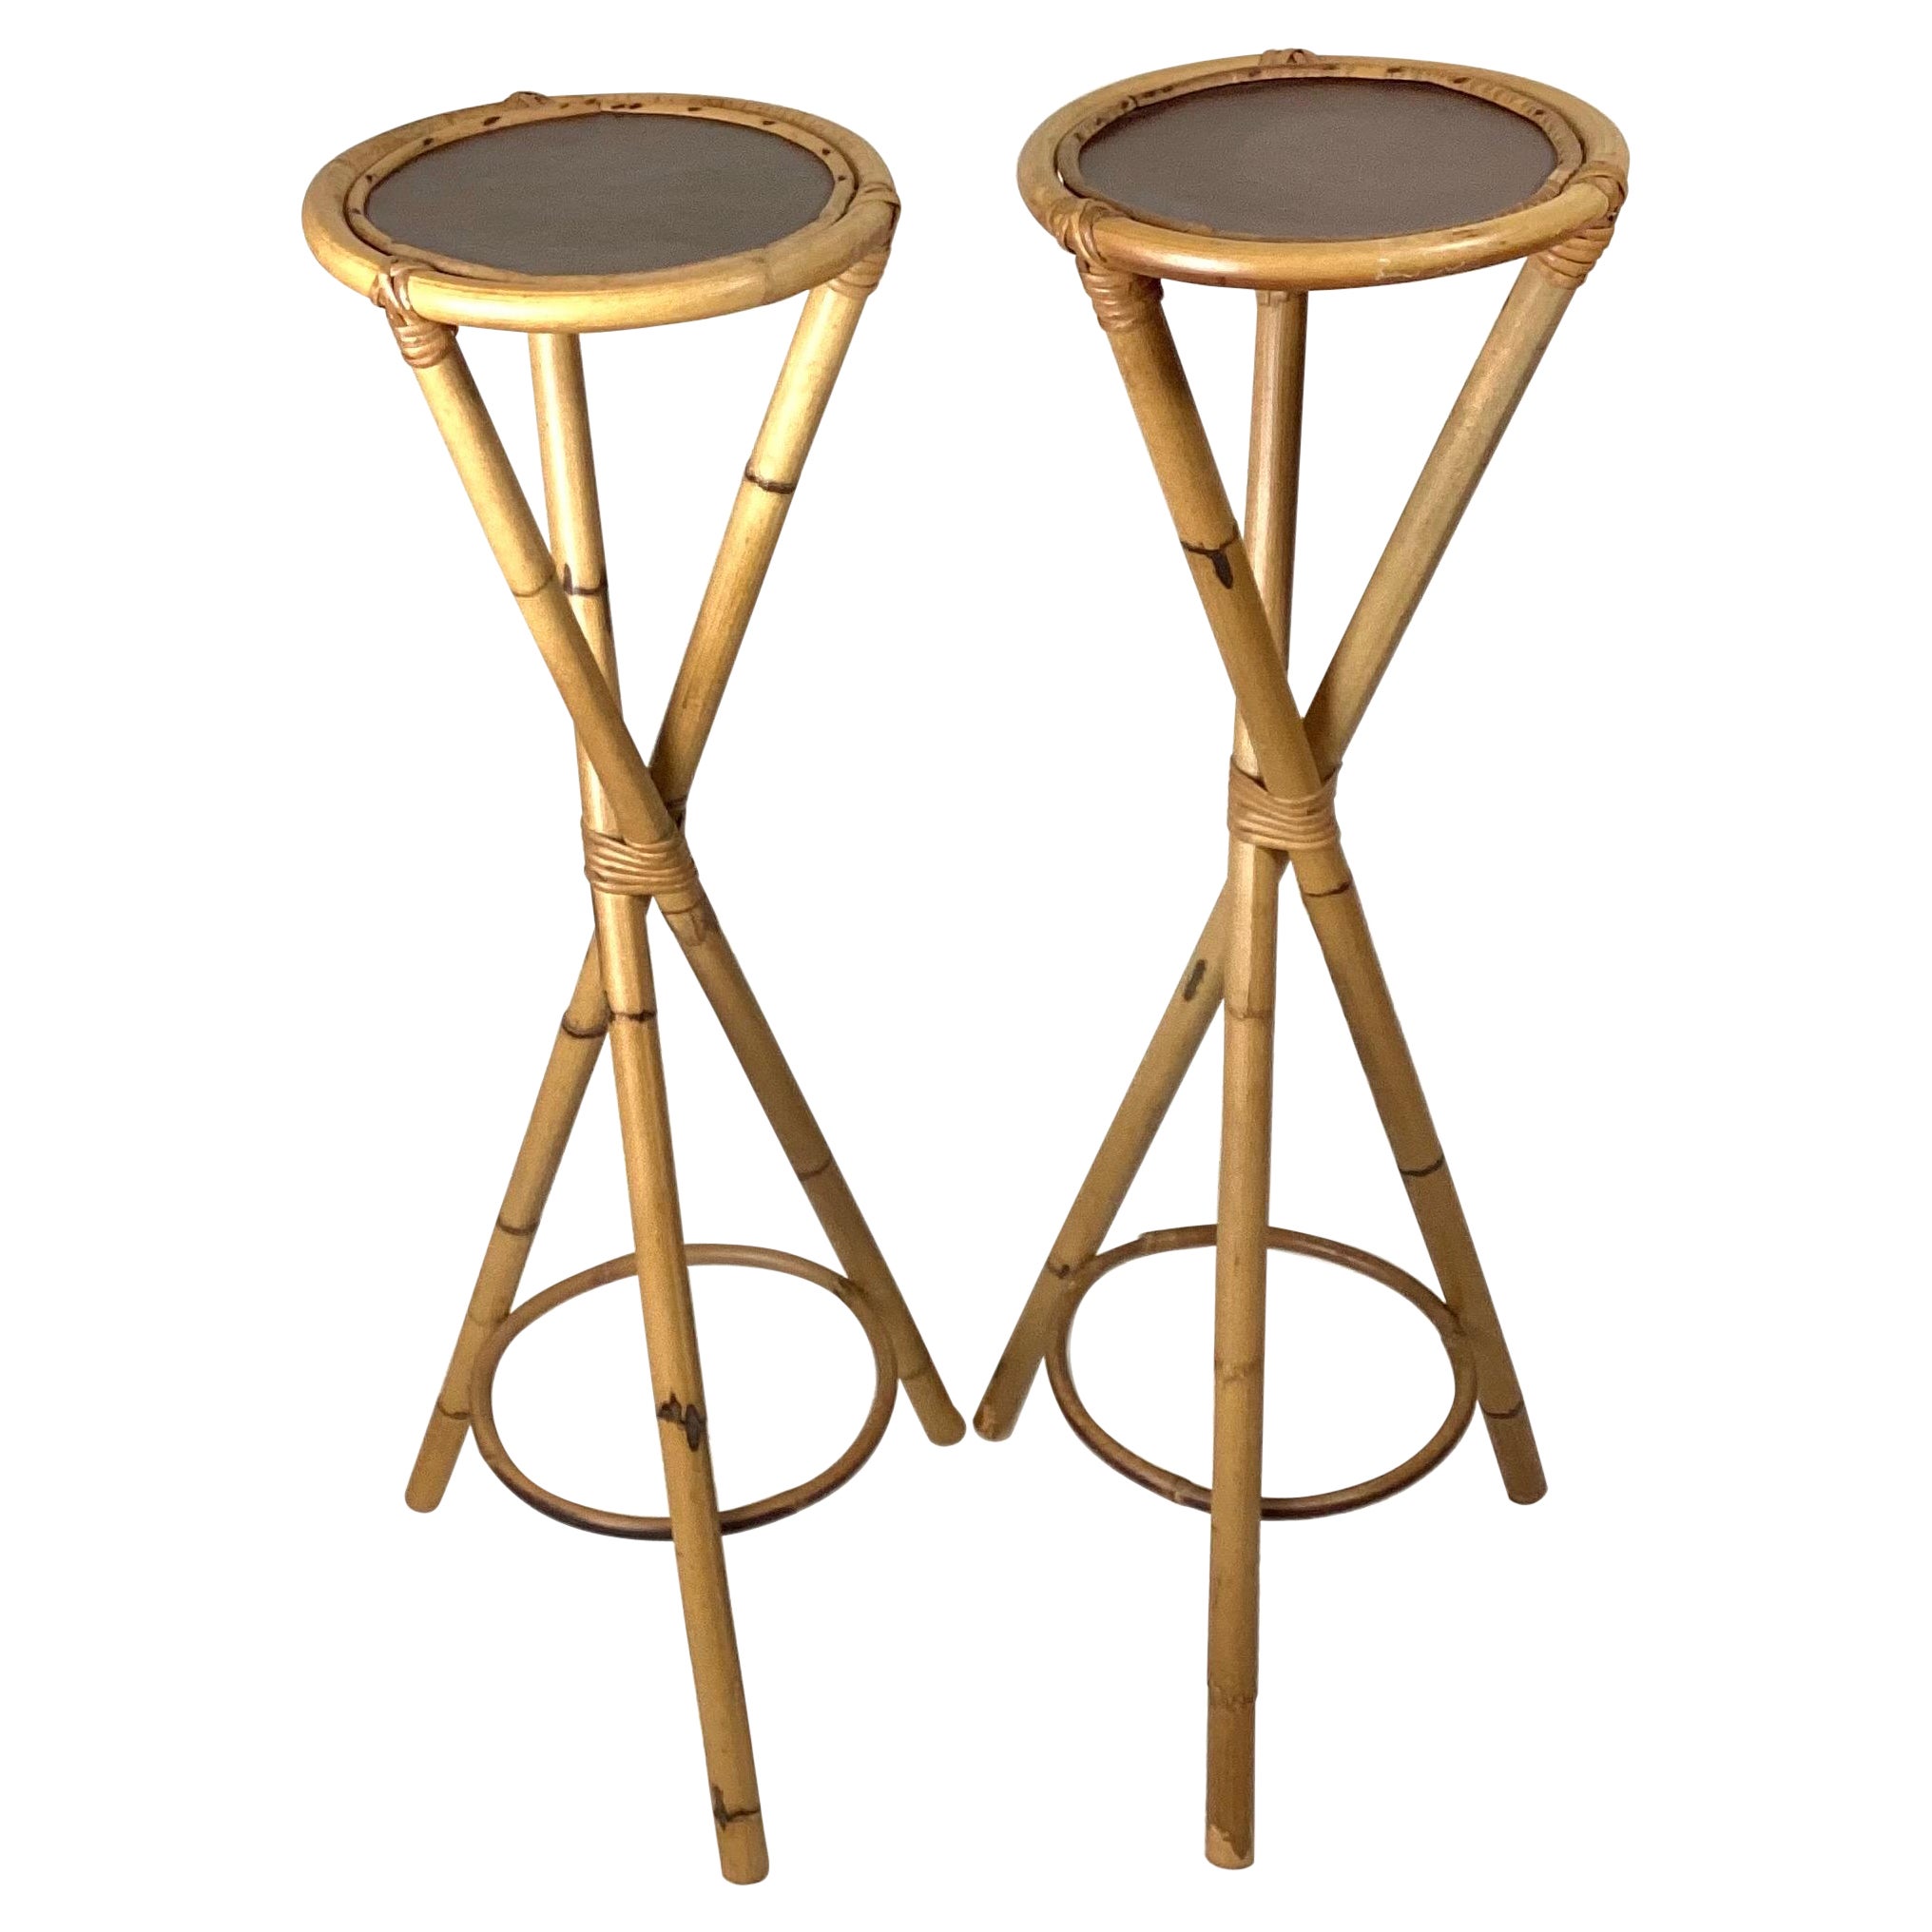 Pair of Rosenthal Netter Bamboo Display Pedestals, Plant Stands, Italy, 1950s For Sale